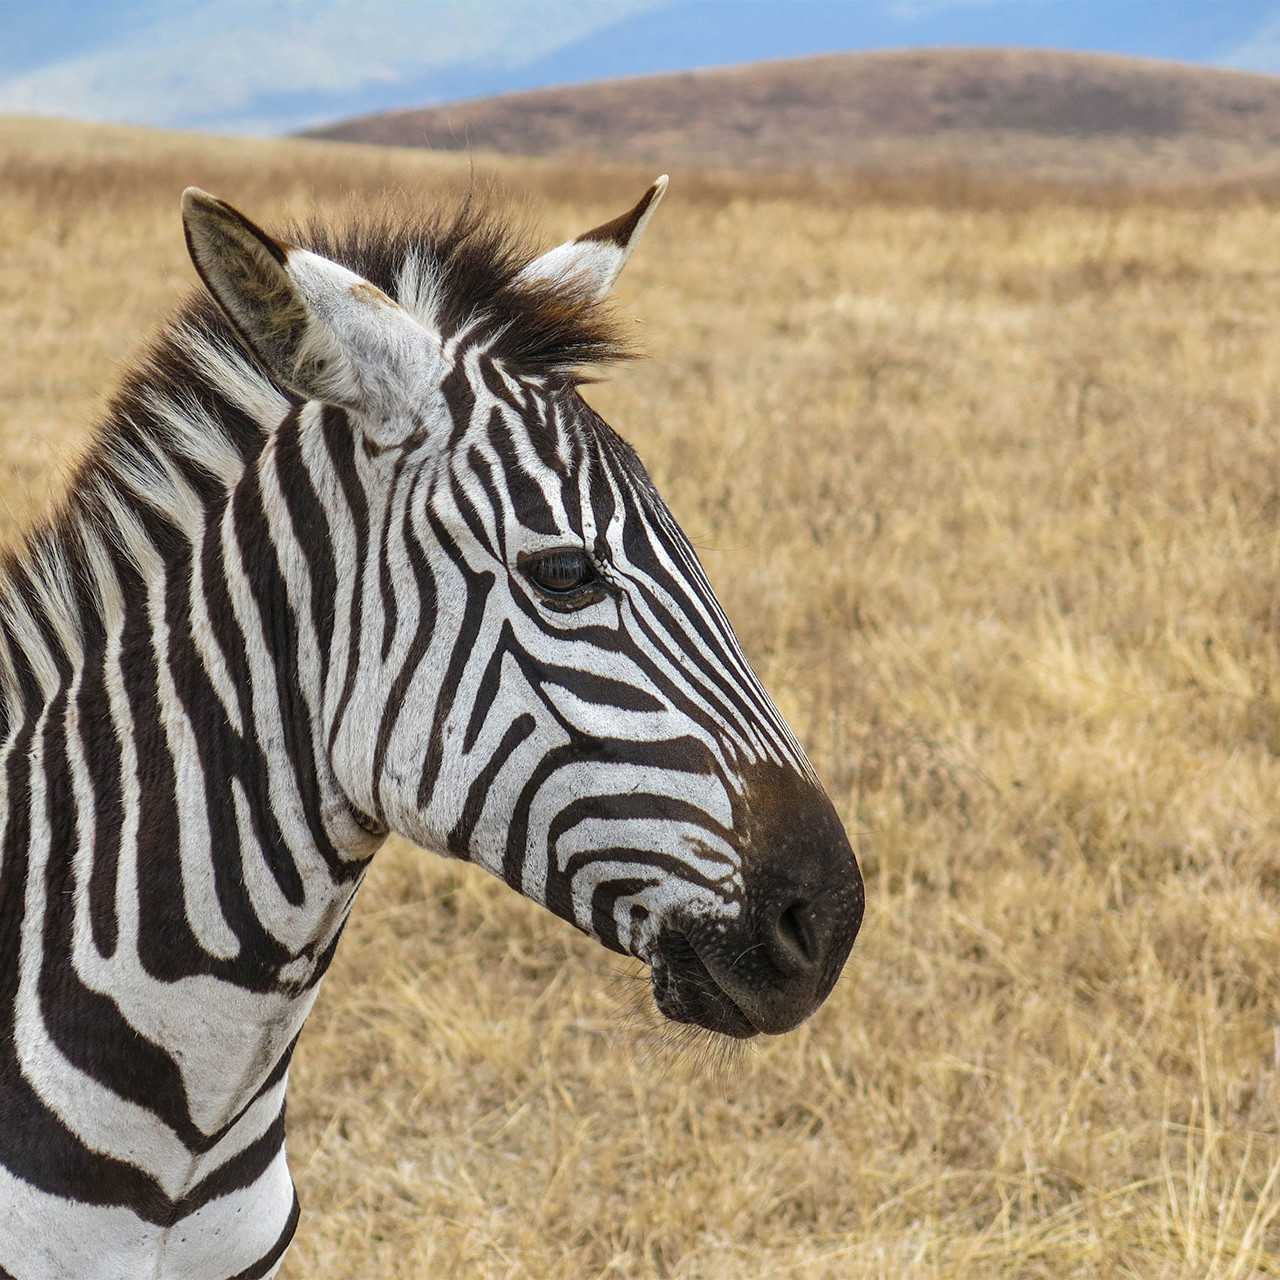 One of the many zebras you can see in the Ngorongoro Crater, in Northern Tanzania. Summer 2016